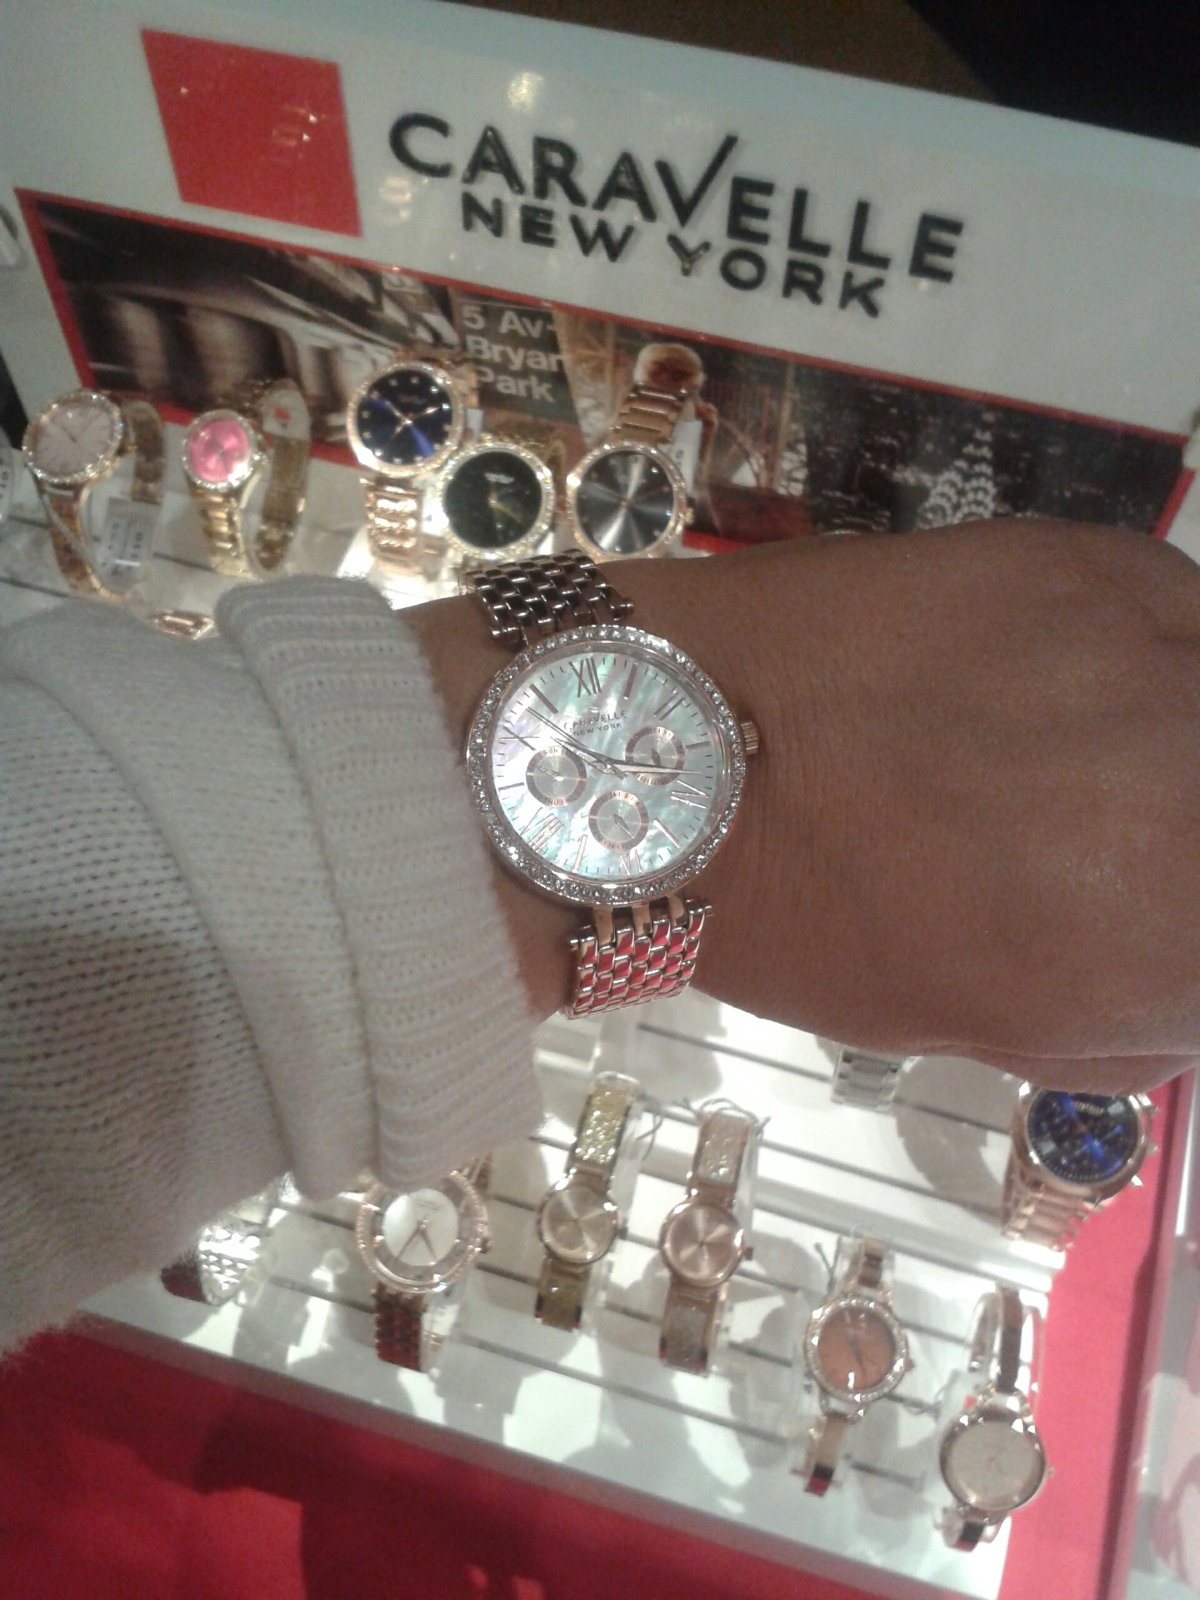 Christmas Gift Guide for HER Caravelle New York watches at #BLOGGERCONF '15 The Marker Hotel, Dublin. 